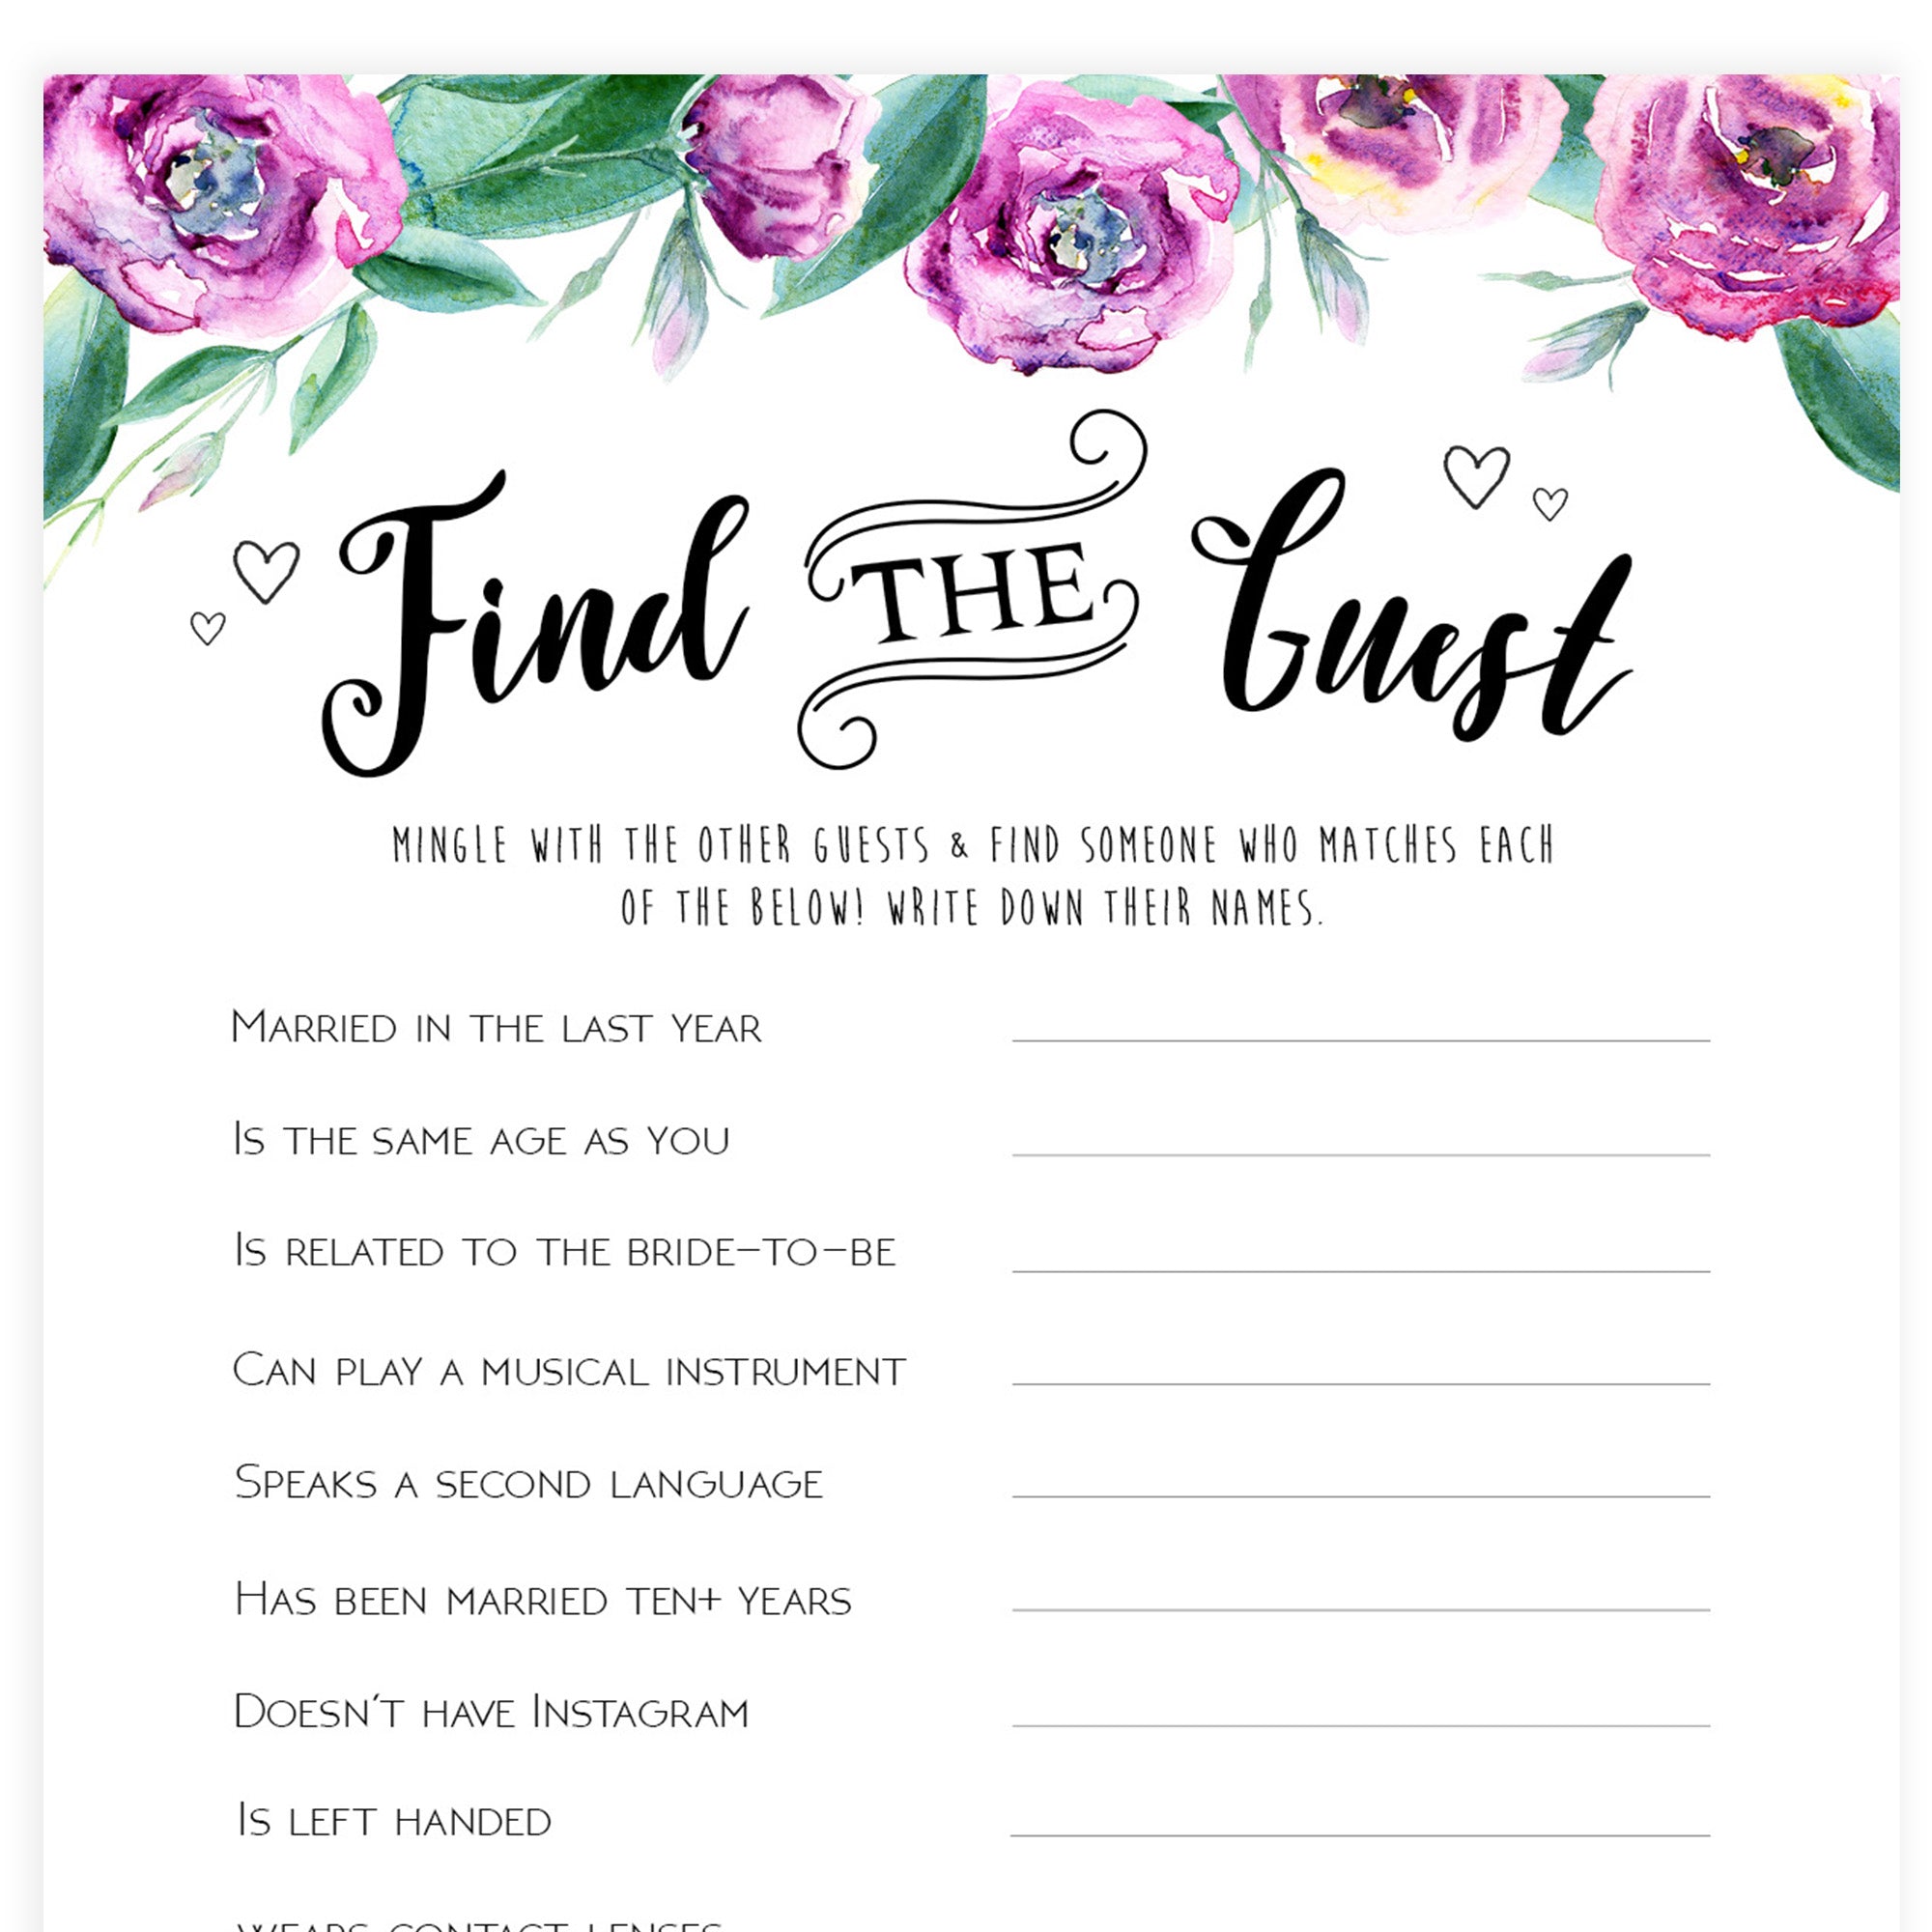 Find The Guest Bridal Game - Purple Peonies